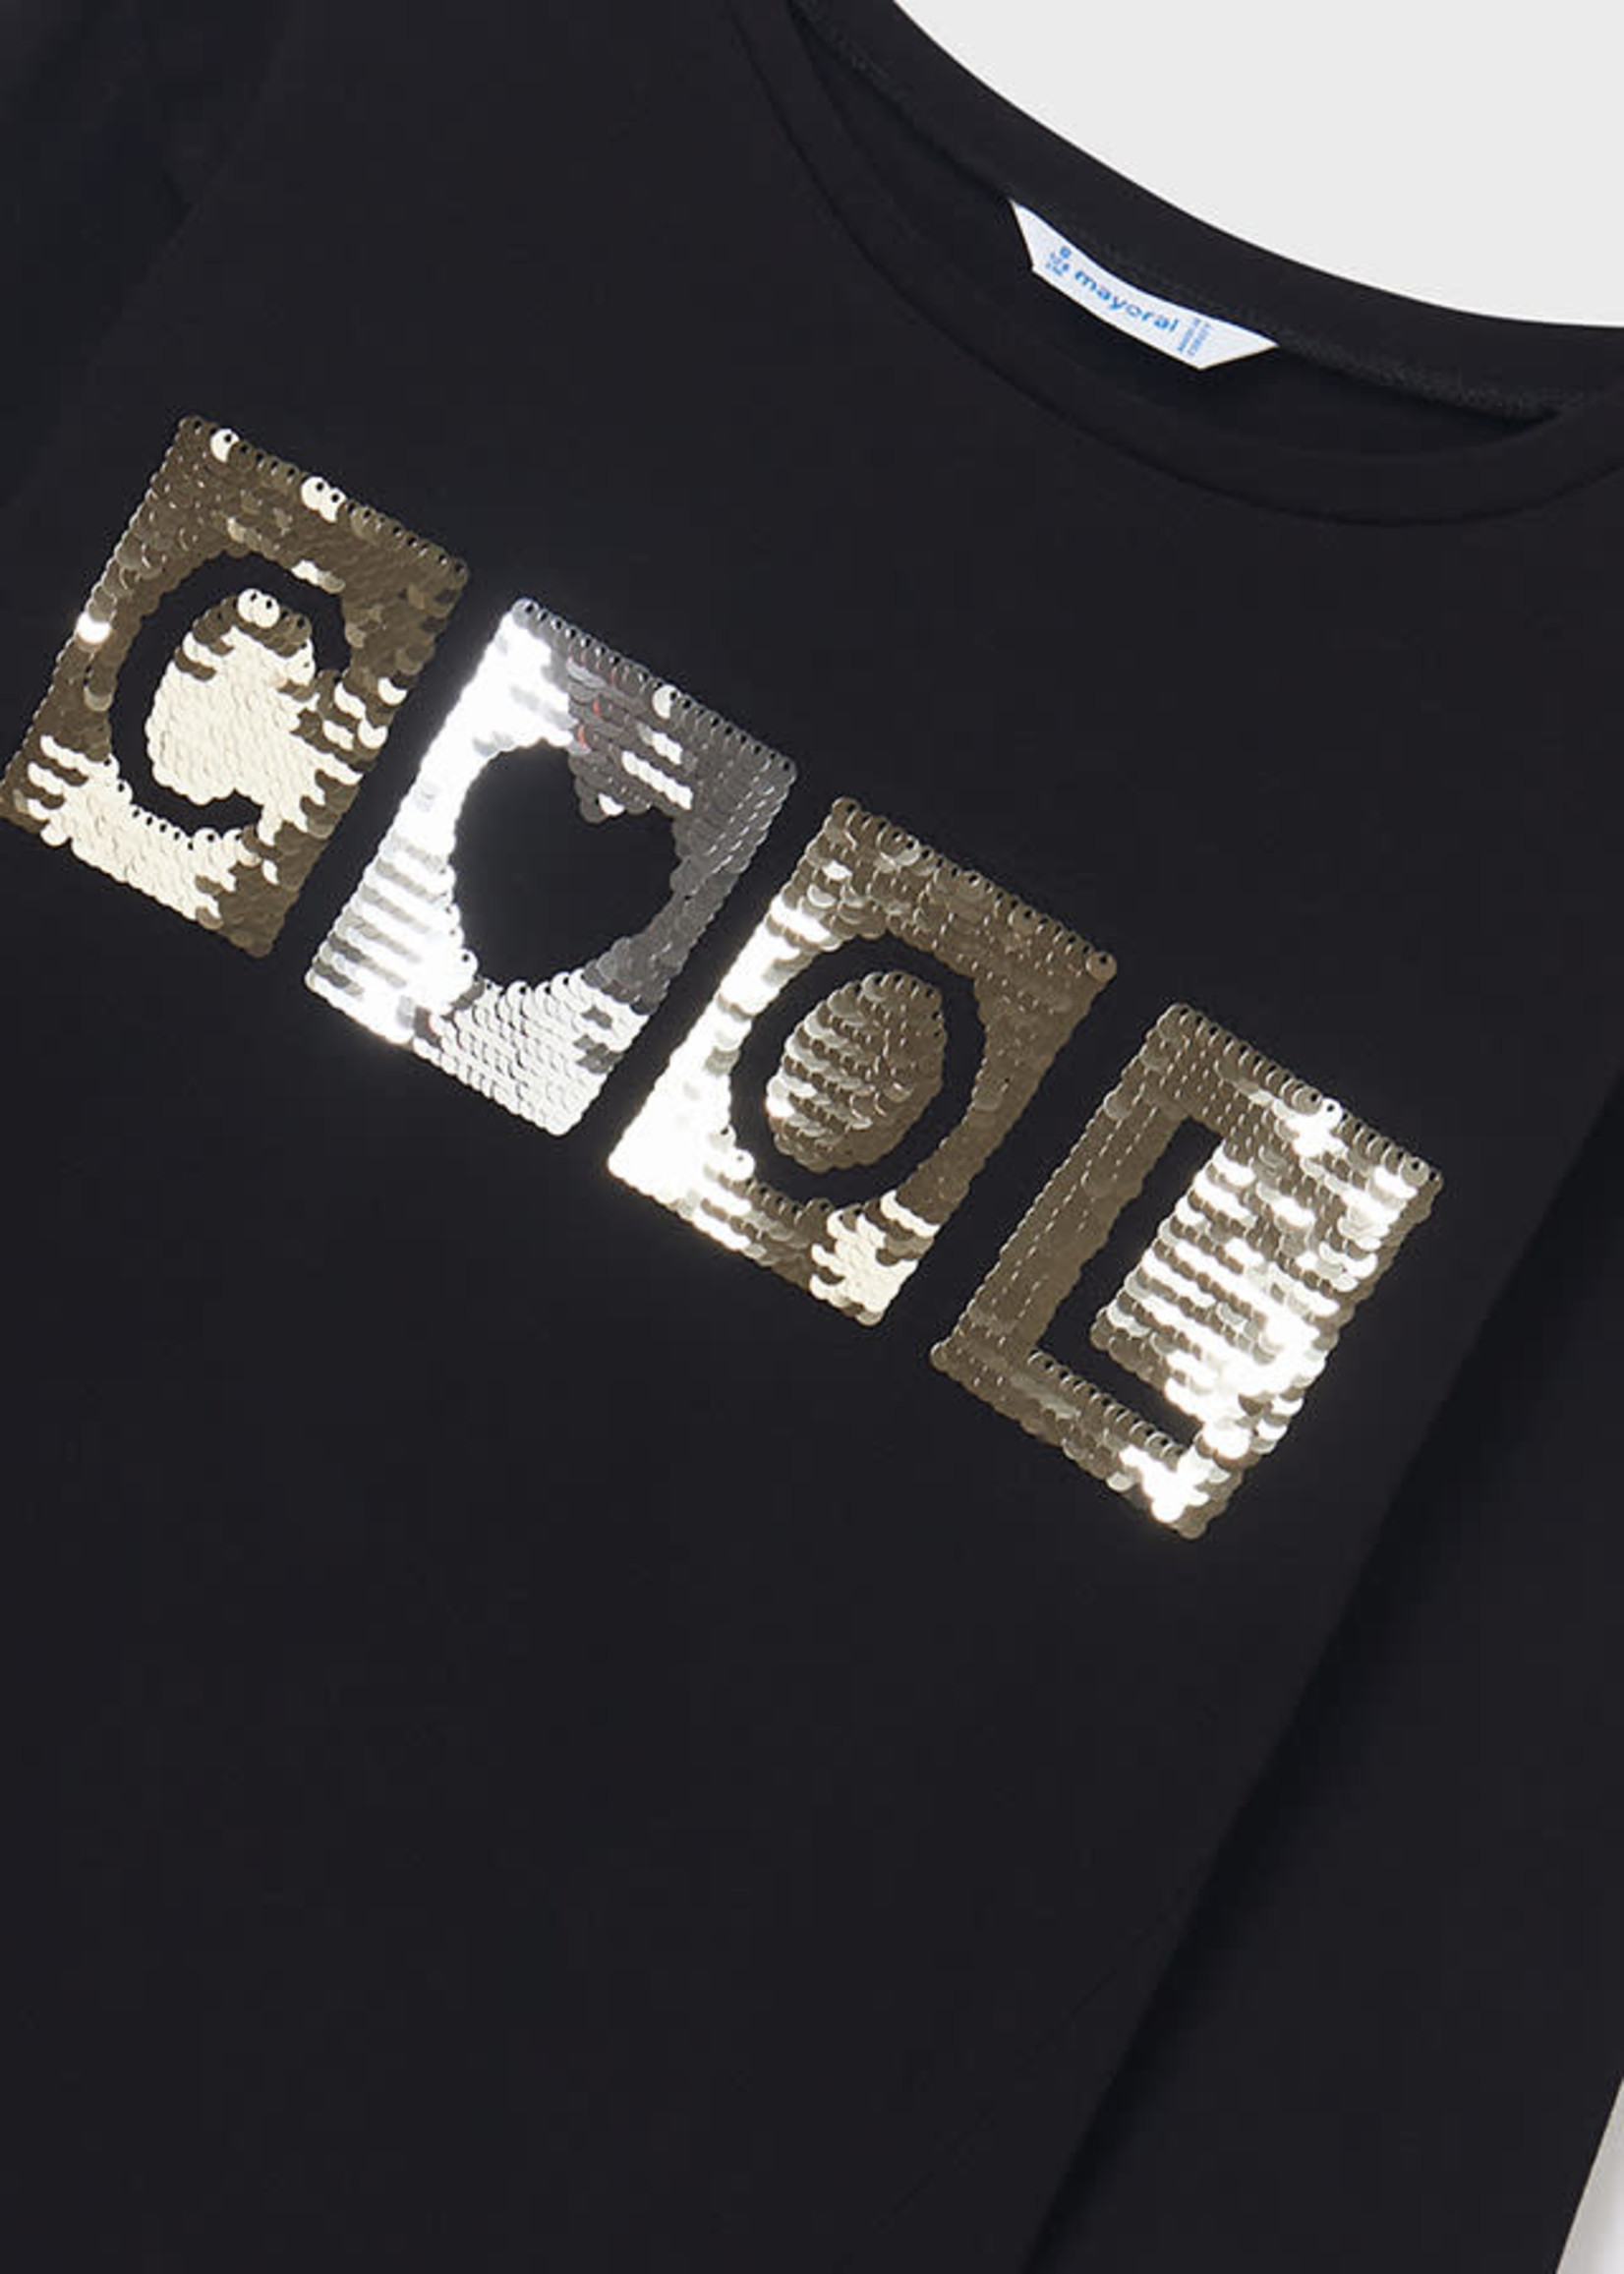 Mayoral M "COOL" Sequin Top